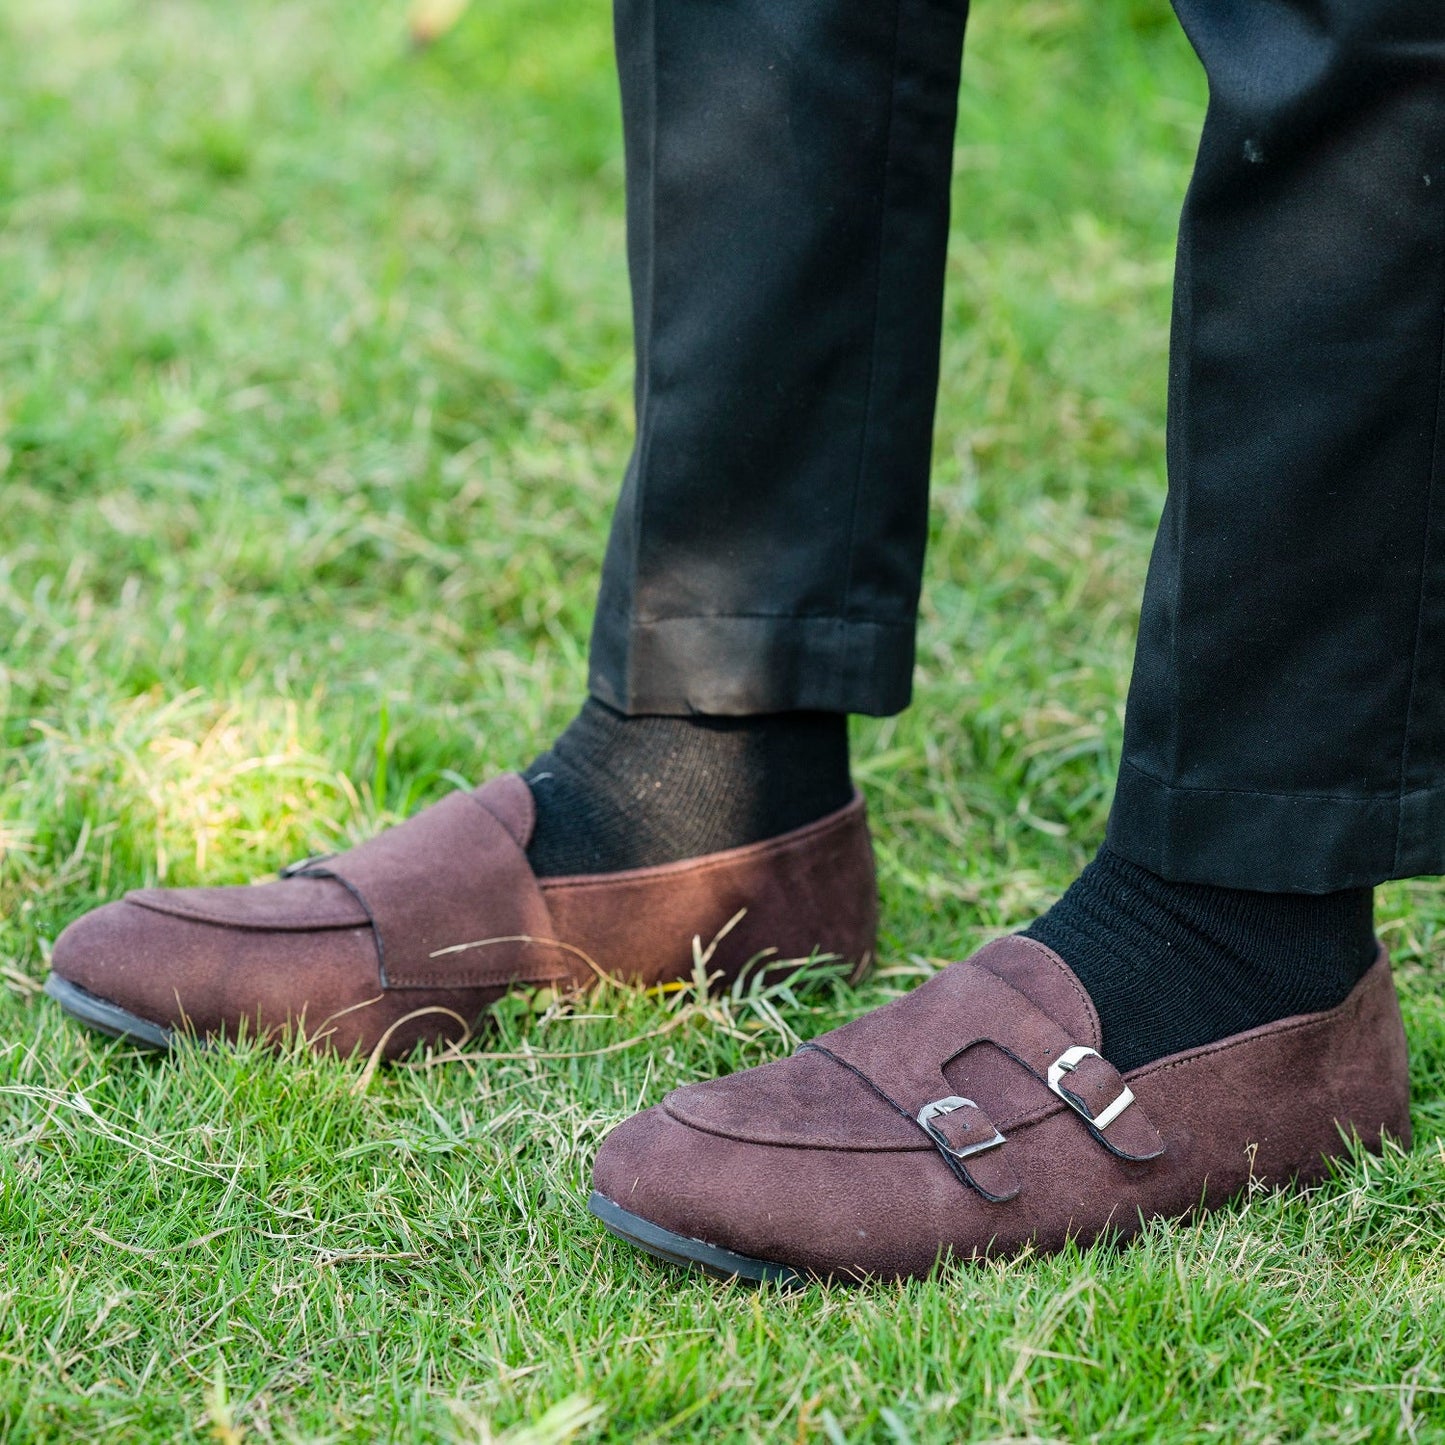 The Aurous Urbane Slip On Loafers - Brown Edition